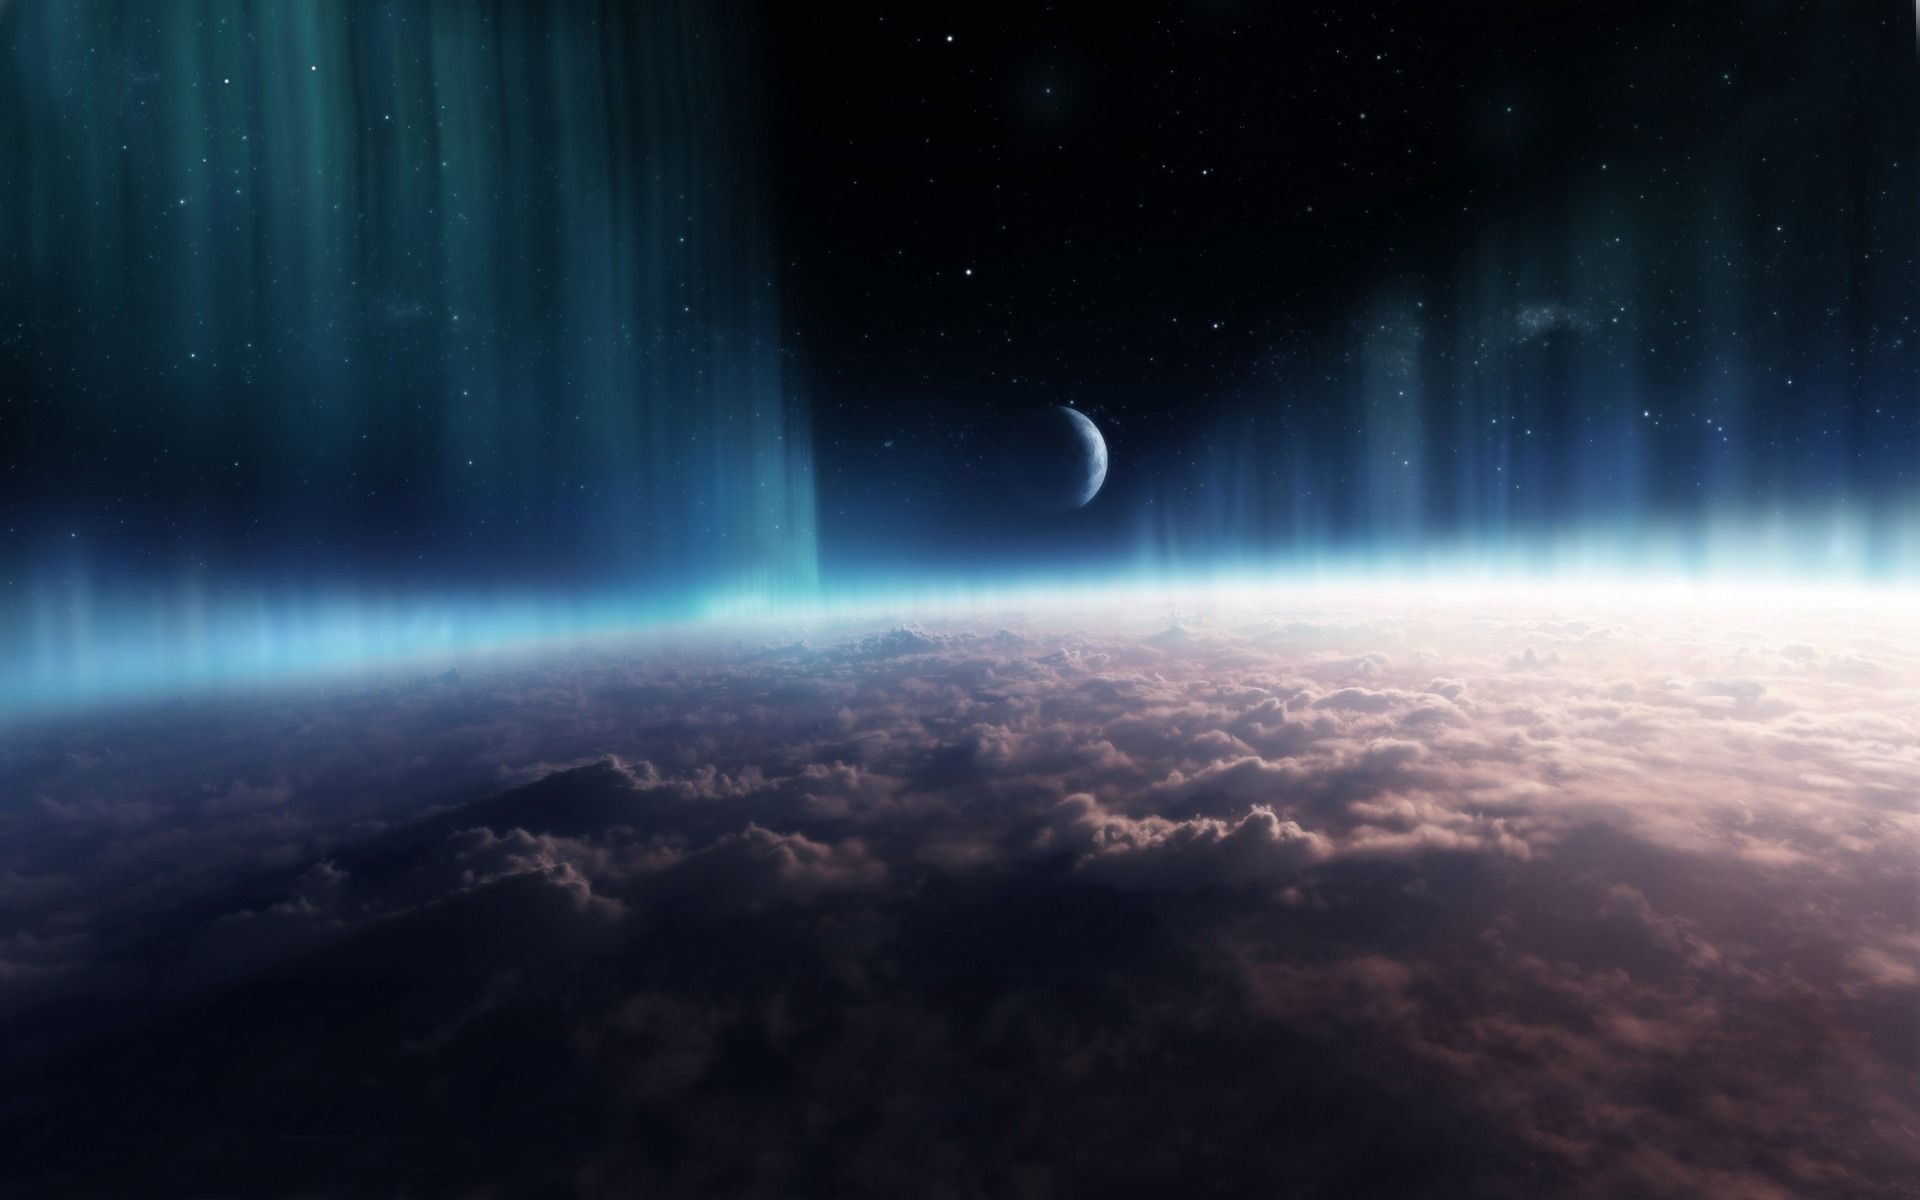 EPIC SPACE BACKGROUNDS - Space Backgrounds